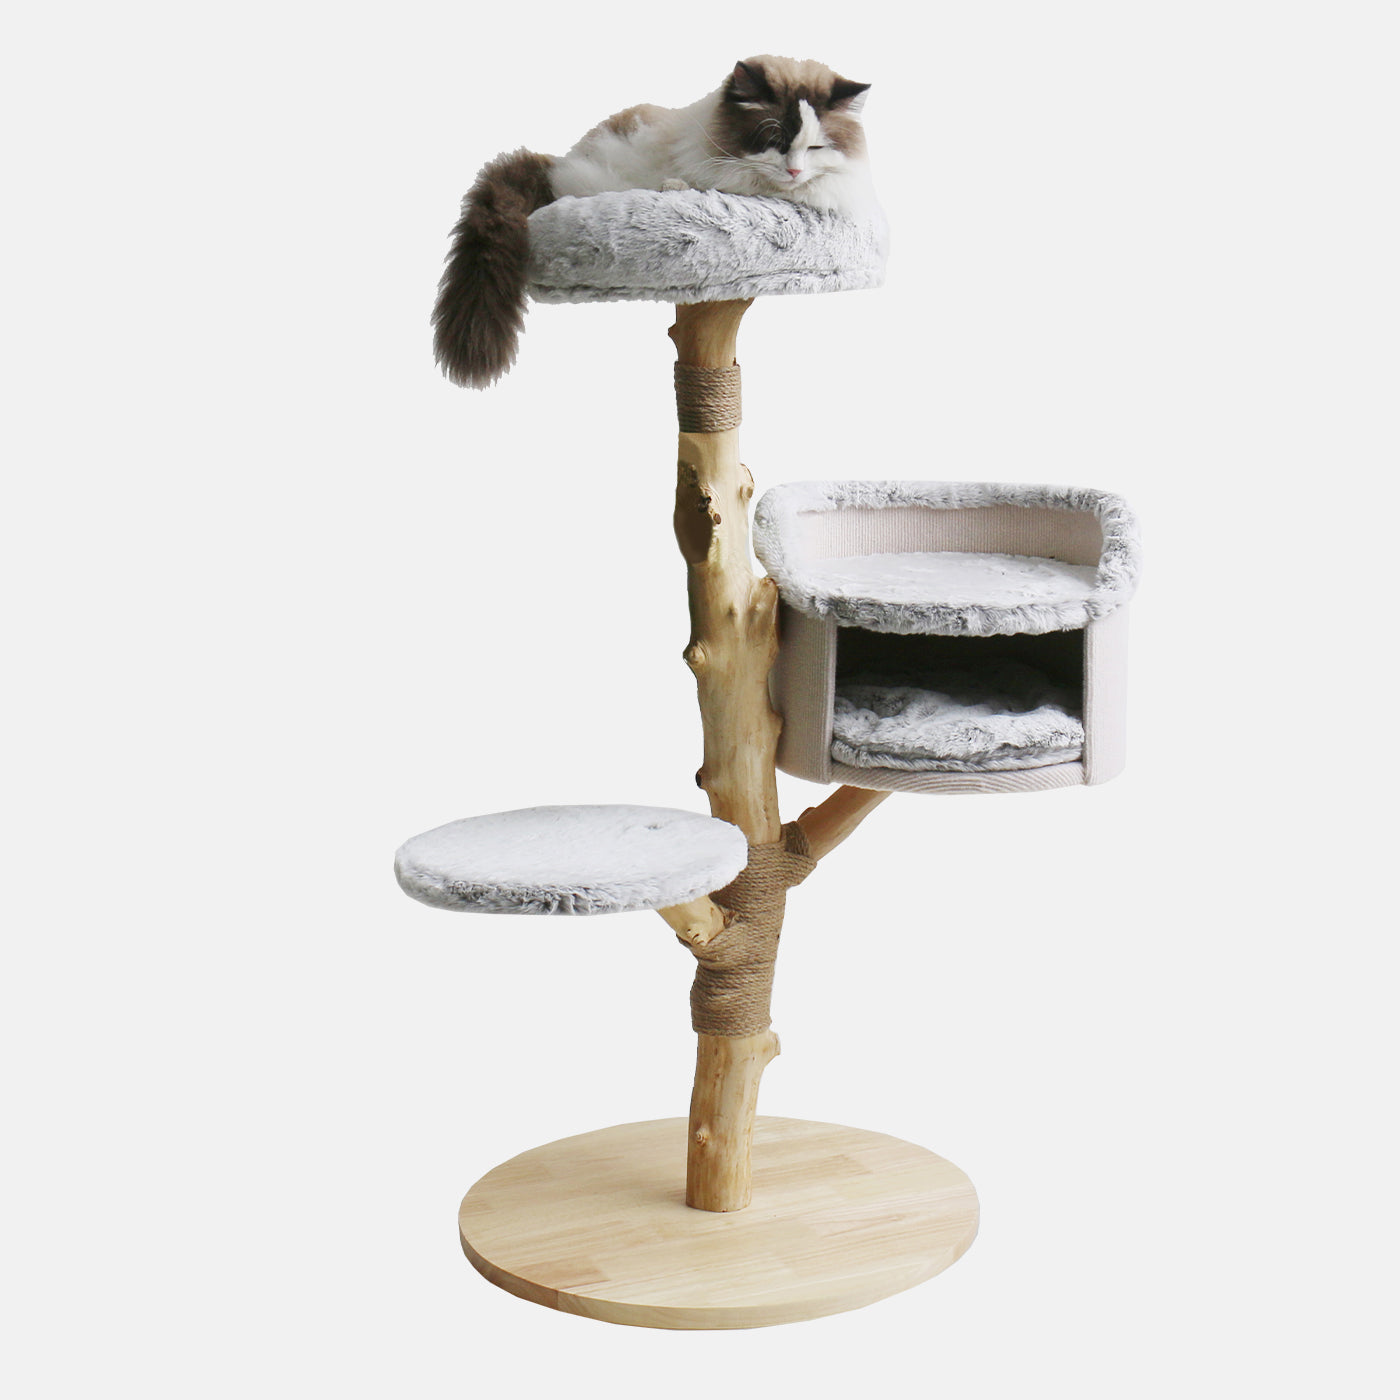  Discover our Back to Nature The Luxe Cat Scratch Post. Features Three Open Perches For Kittens To Rest on, Made With Super Soft Plush Fabric! Available Now at Lords & Labradors US